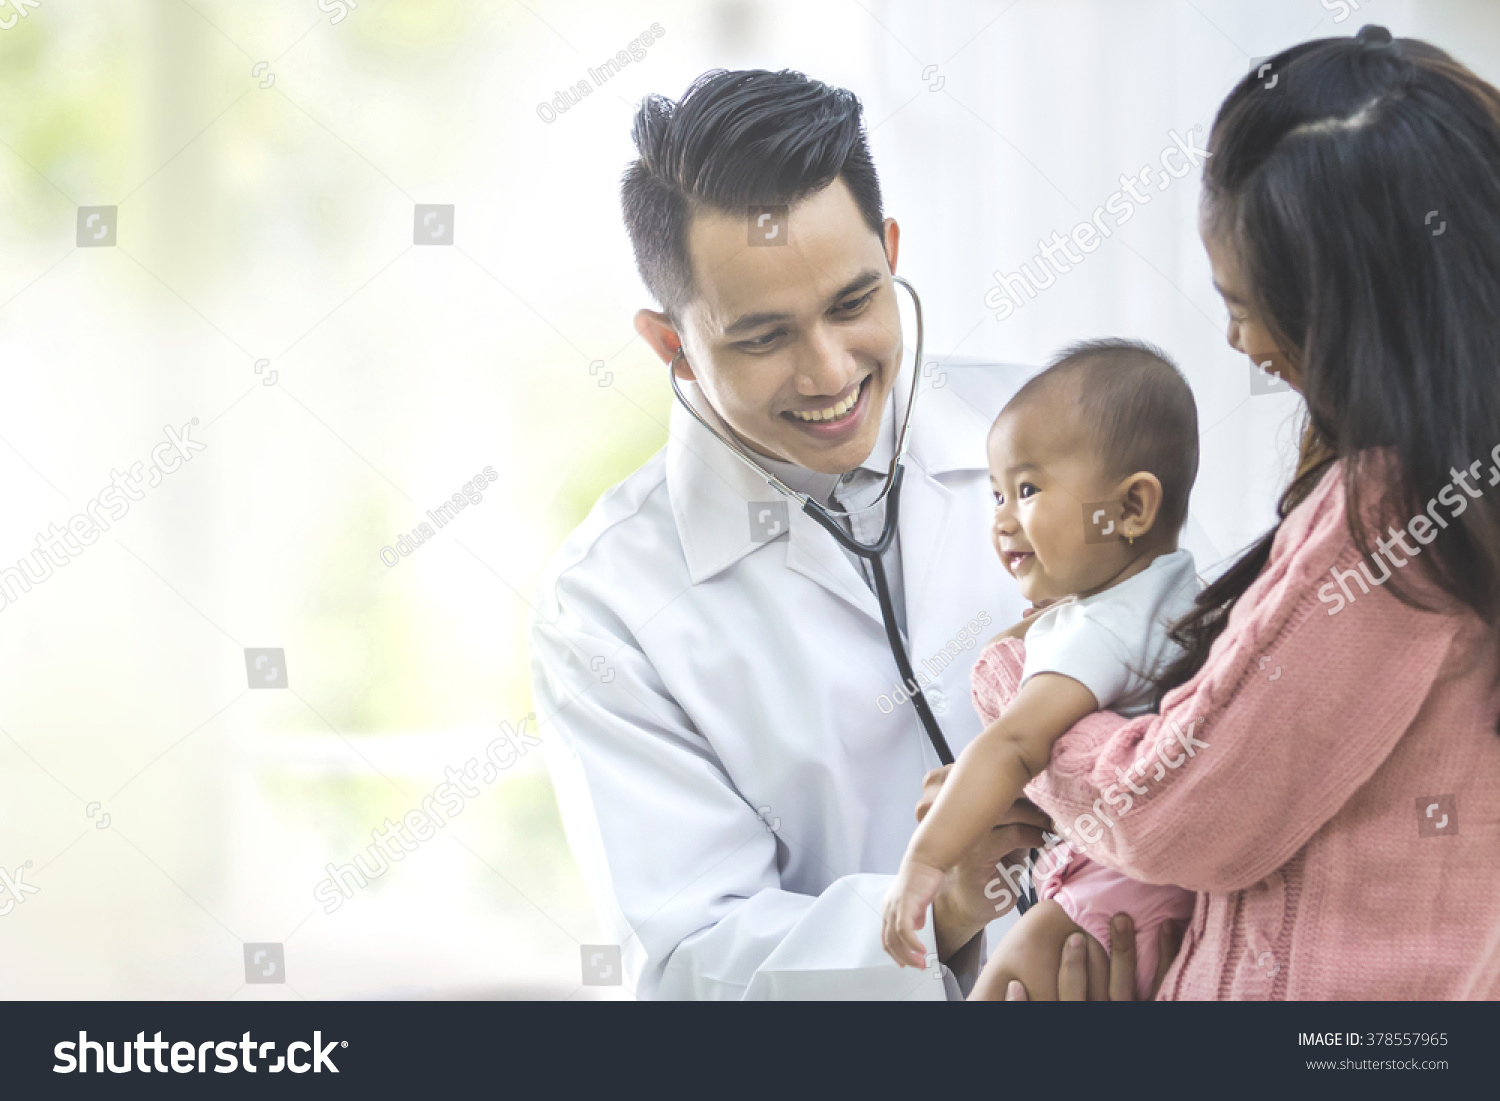 portrait of a baby being checked by a doctor using a stethoscope #378557965